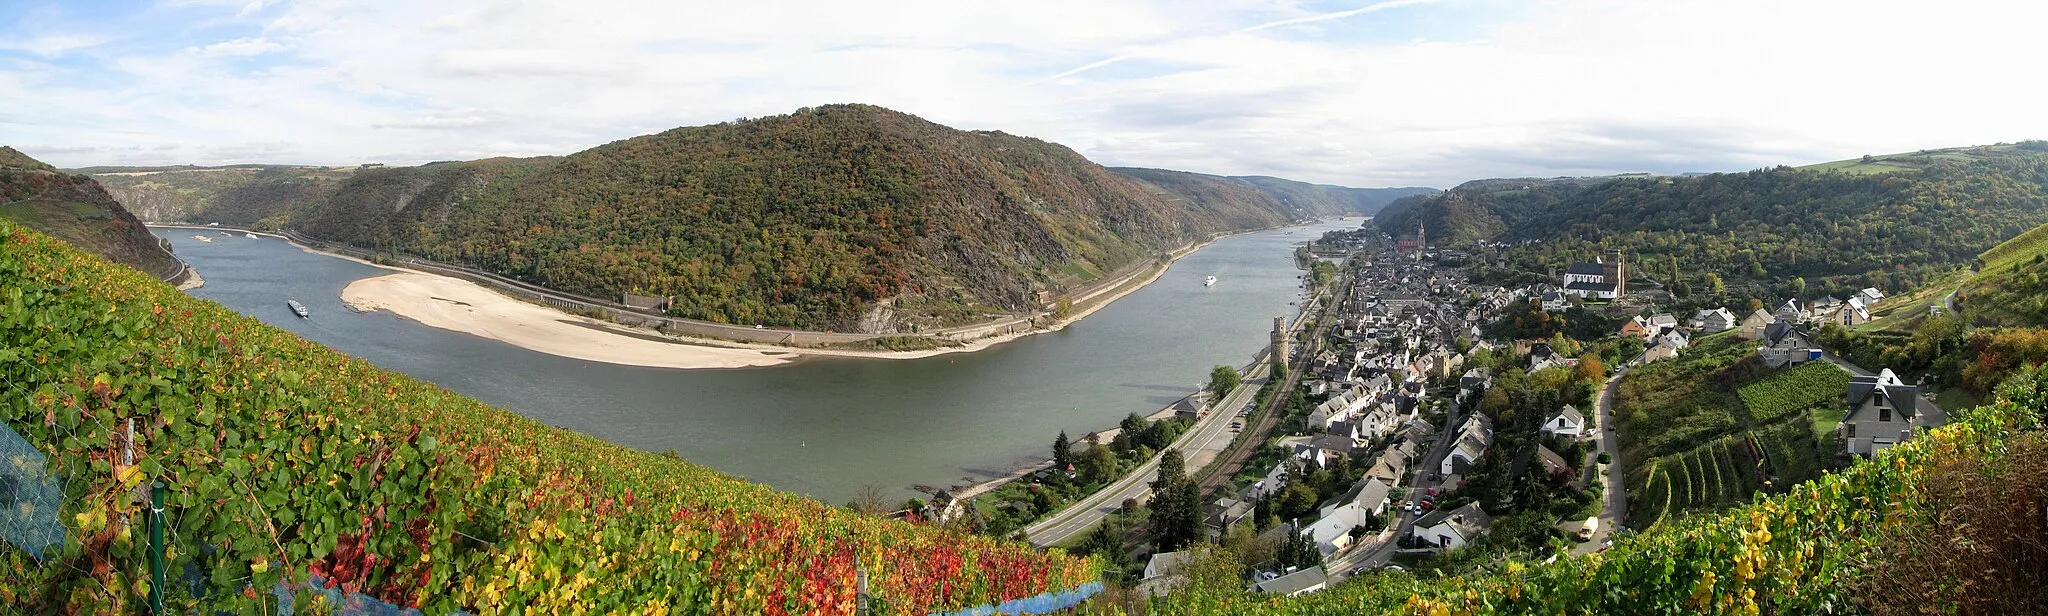 Photo showing: Middle rhine valley nearby Oberwesel